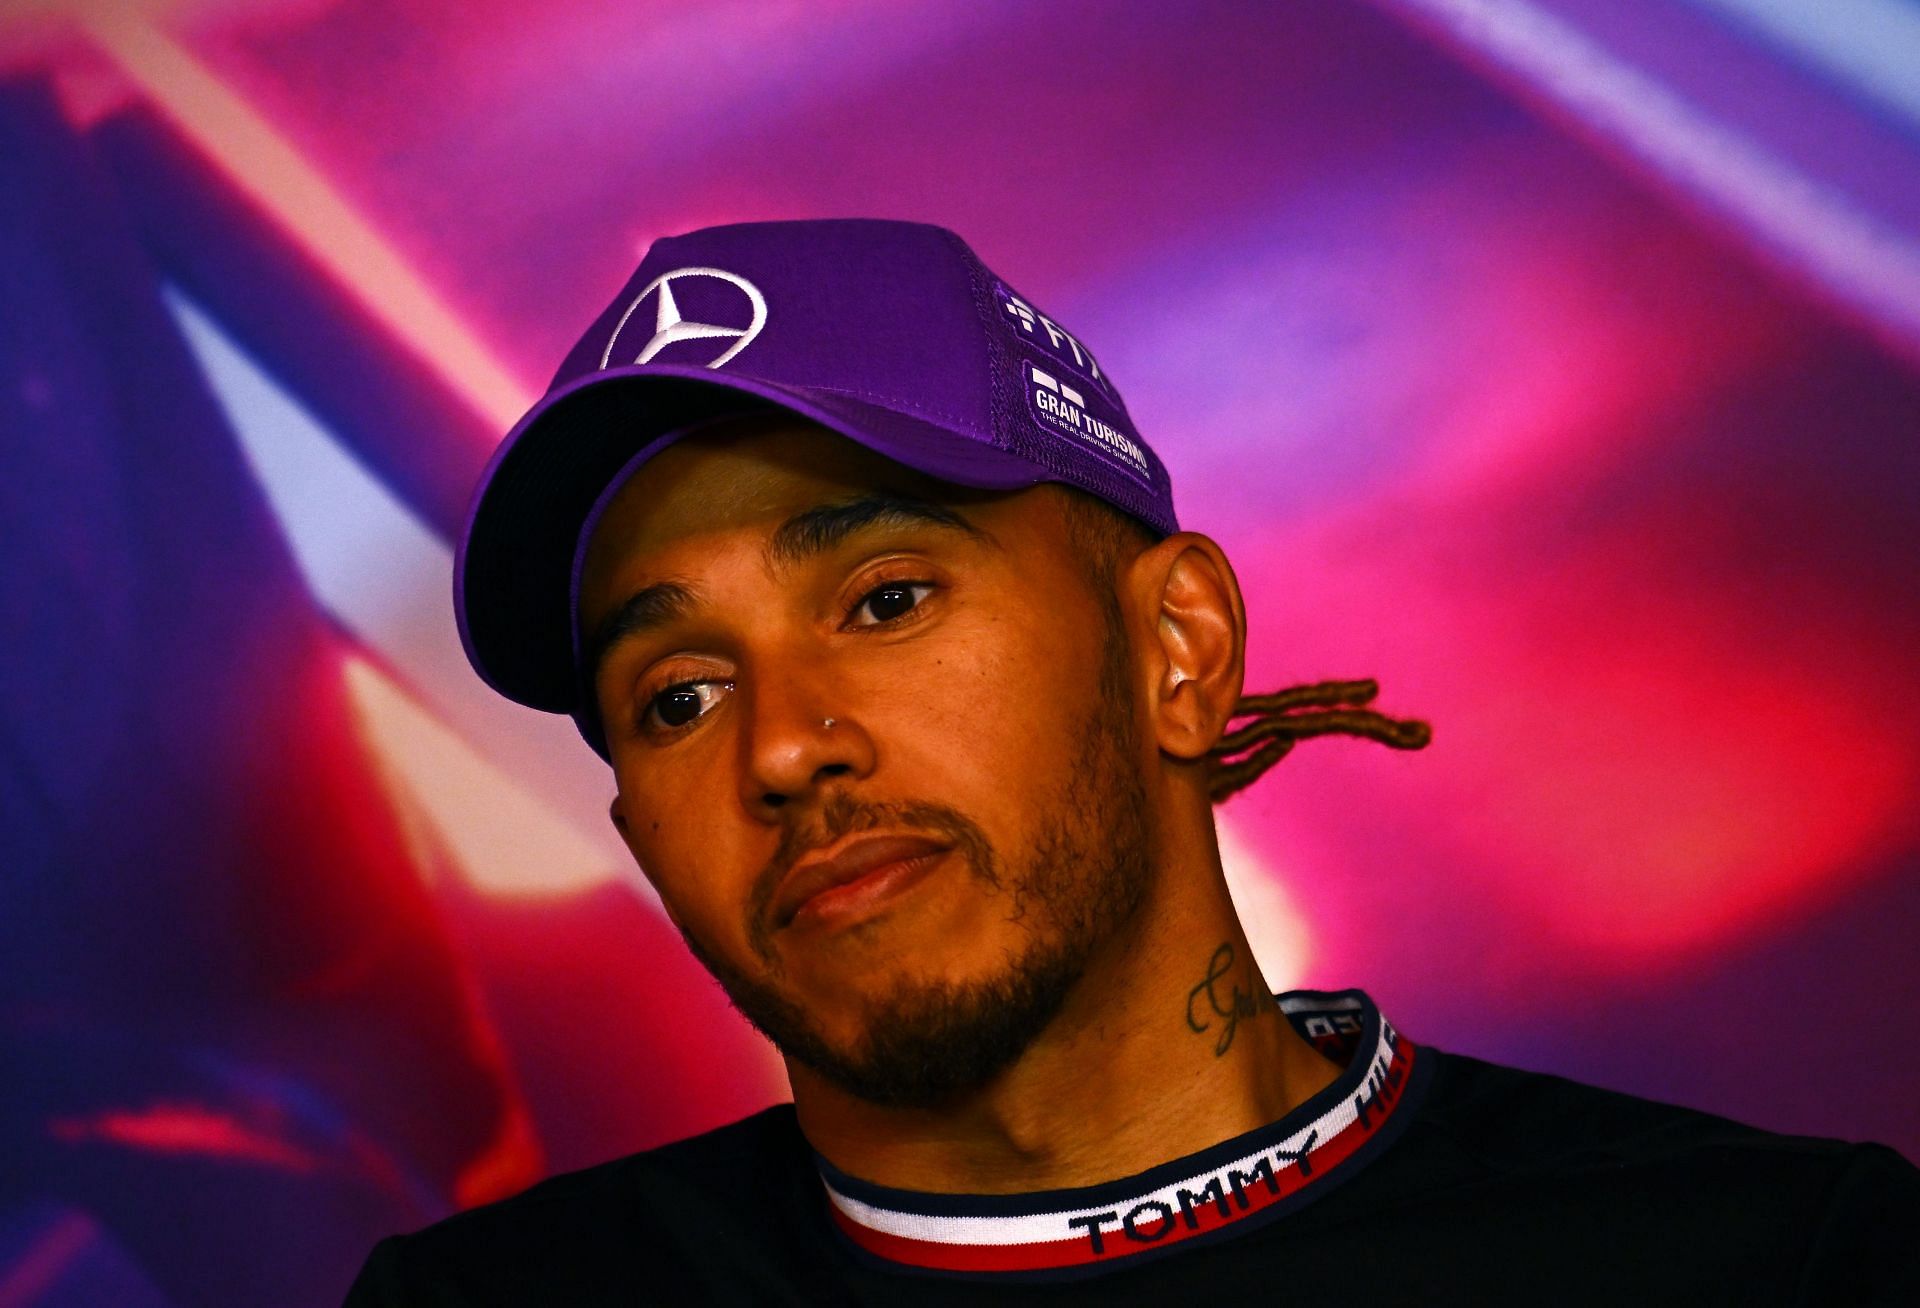 Lewis Hmailton speaks to the media after his P3 finish at the 2022 F1 Canadian GP. (Photo by Clive Mason/Getty Images)